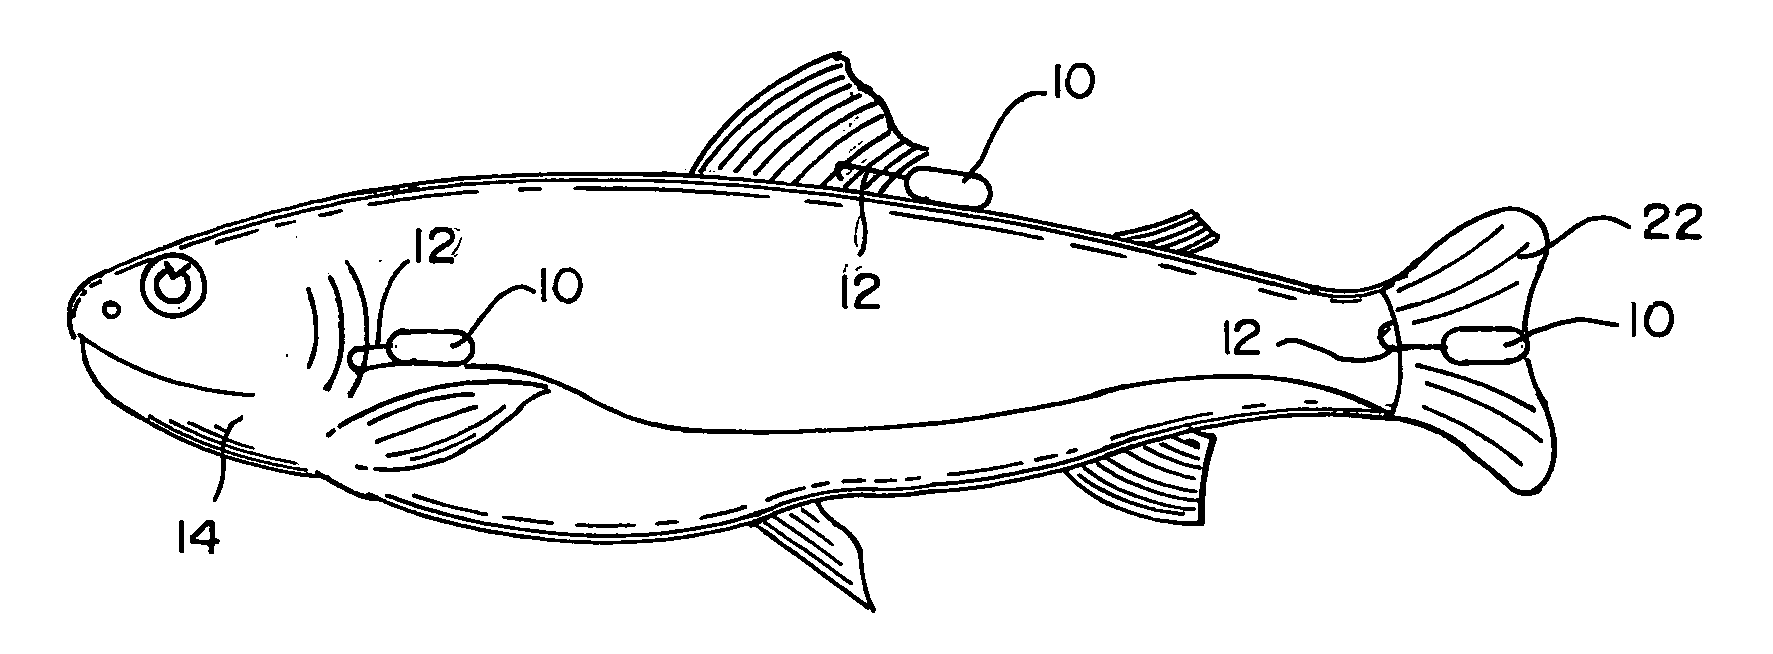 System for reducing the number of predator fish